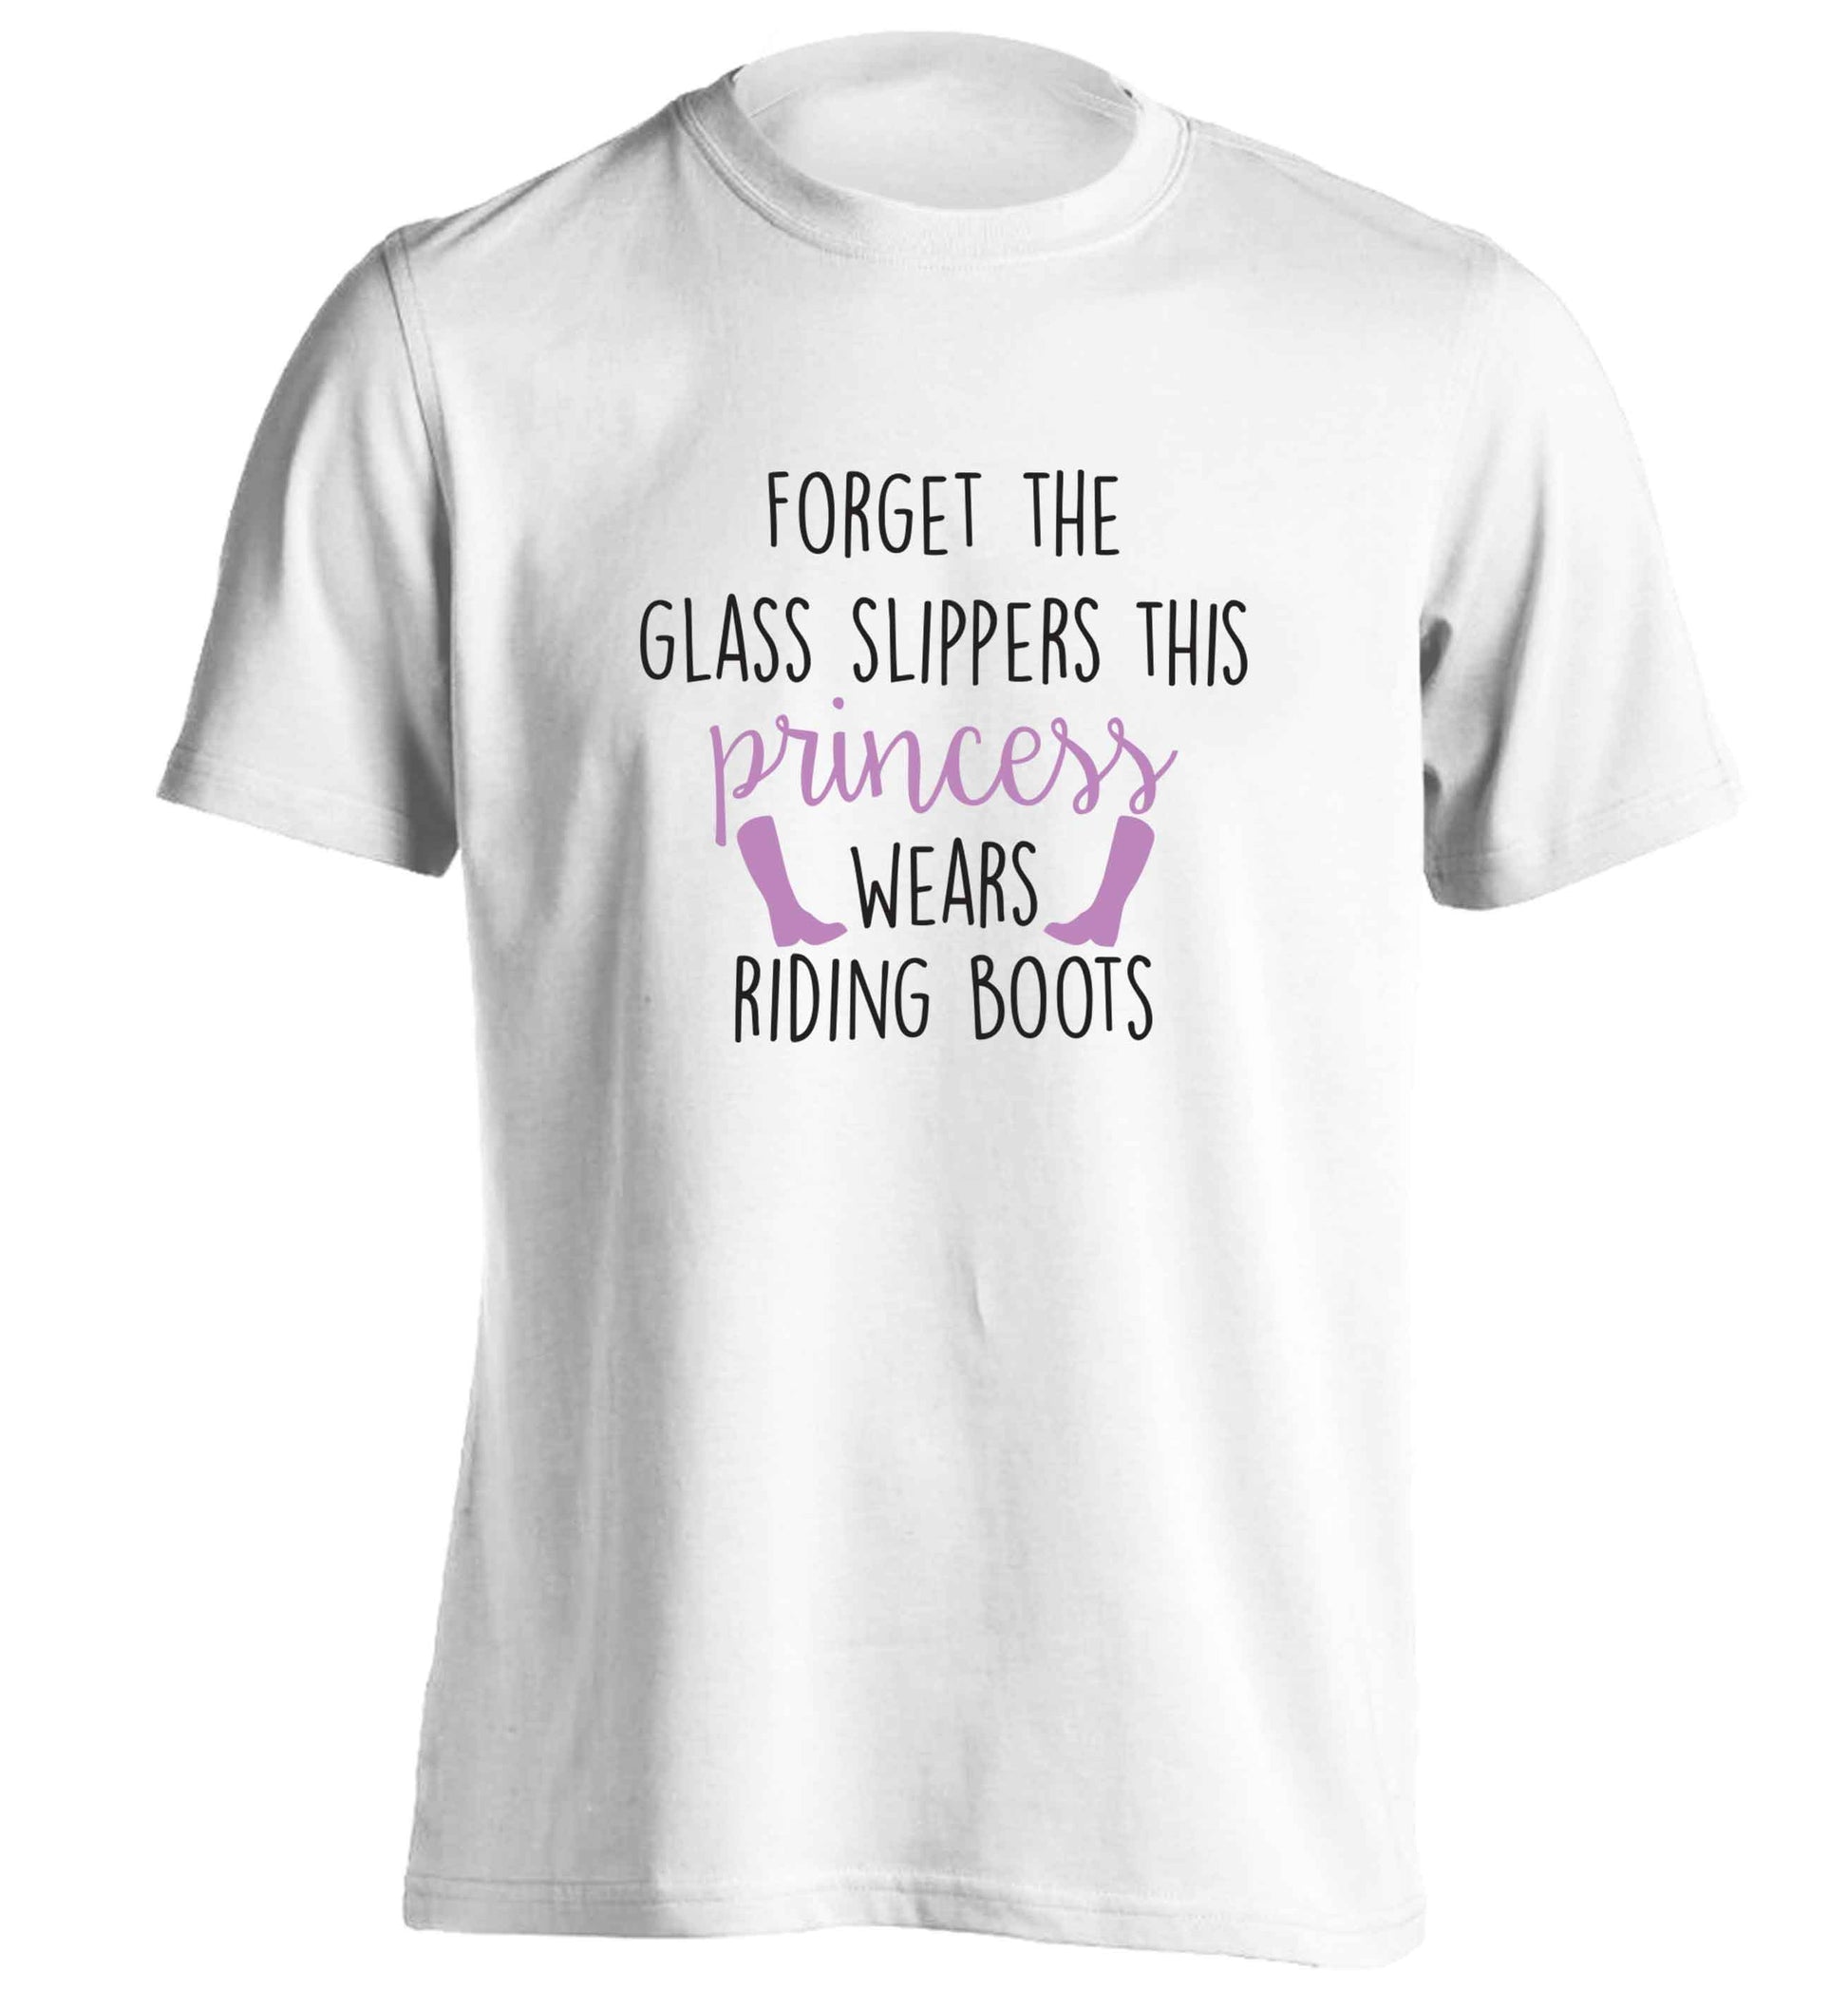 Forget the glass slippers this princess wears riding boots adults unisex white Tshirt 2XL